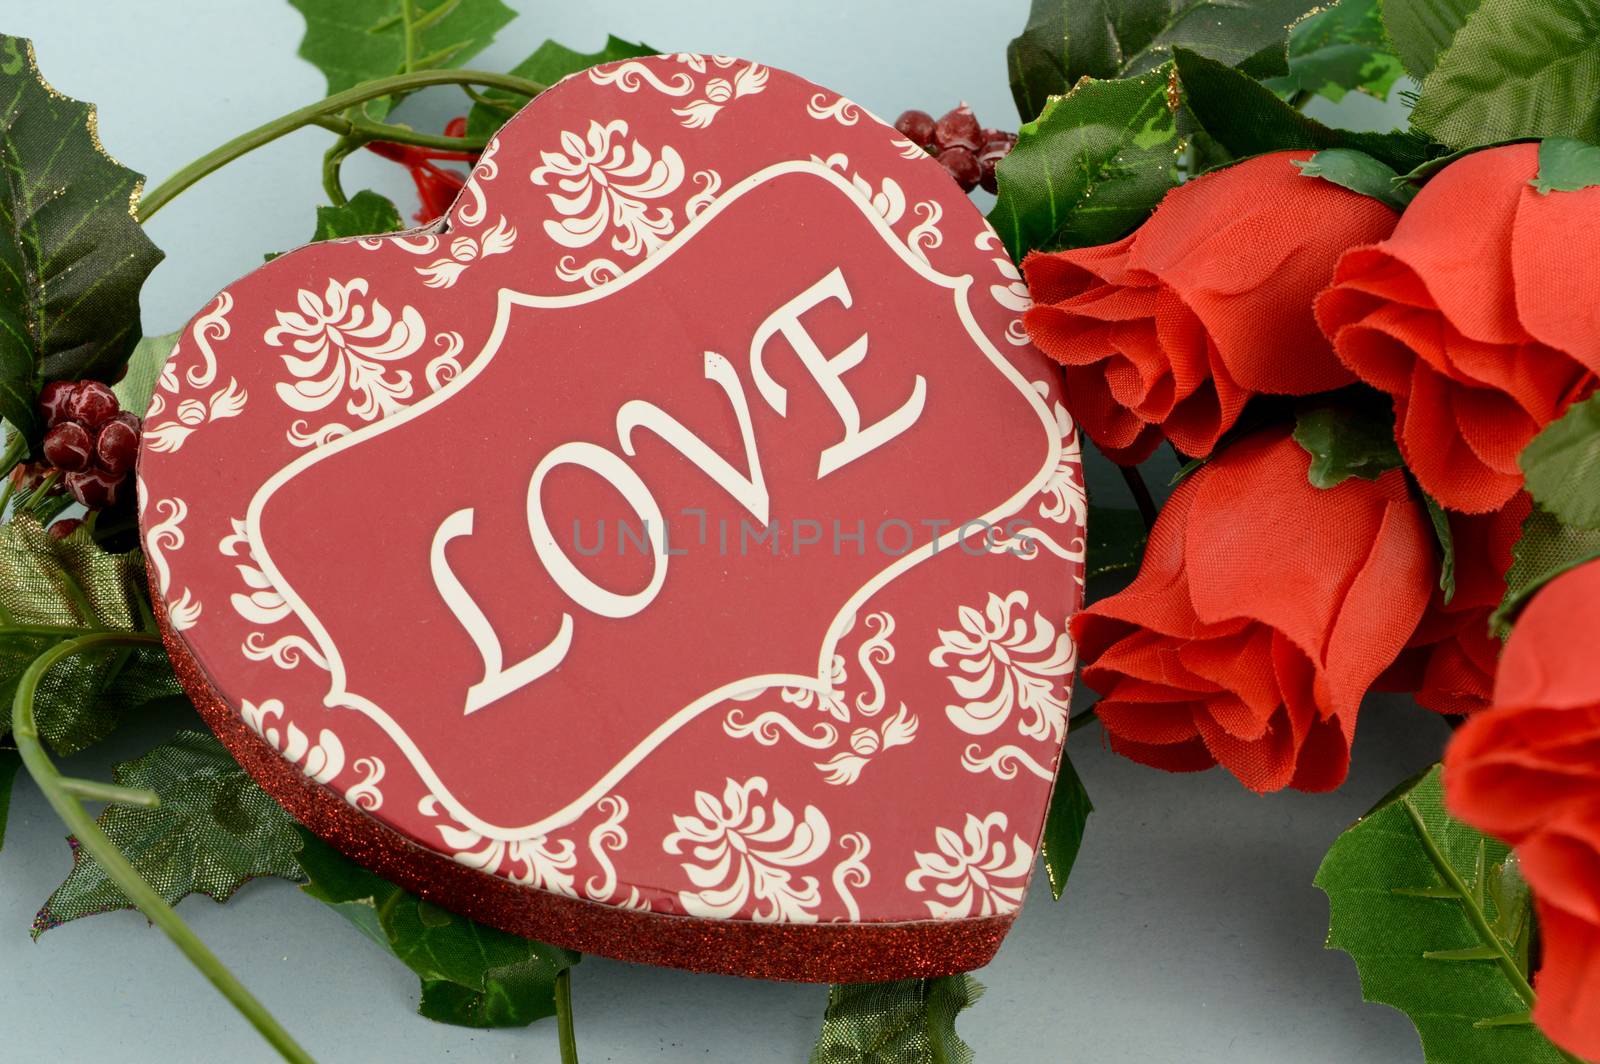 A romantic scene of a heart shaped box of chocolates with a bouquet of red roses.